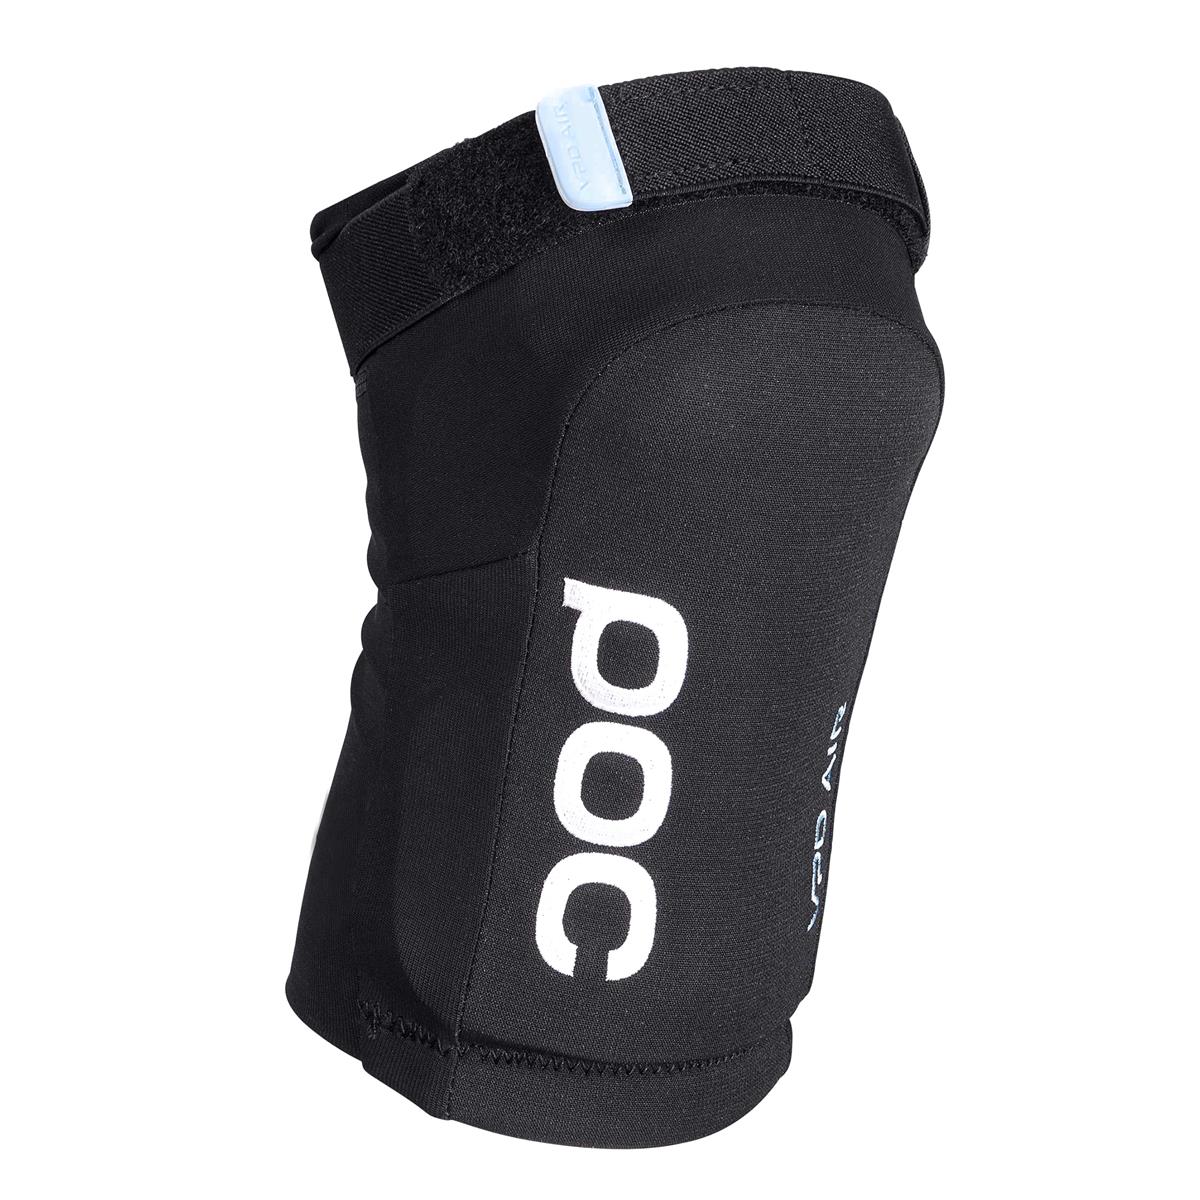 Joint VPD Air Knee pads black Size M